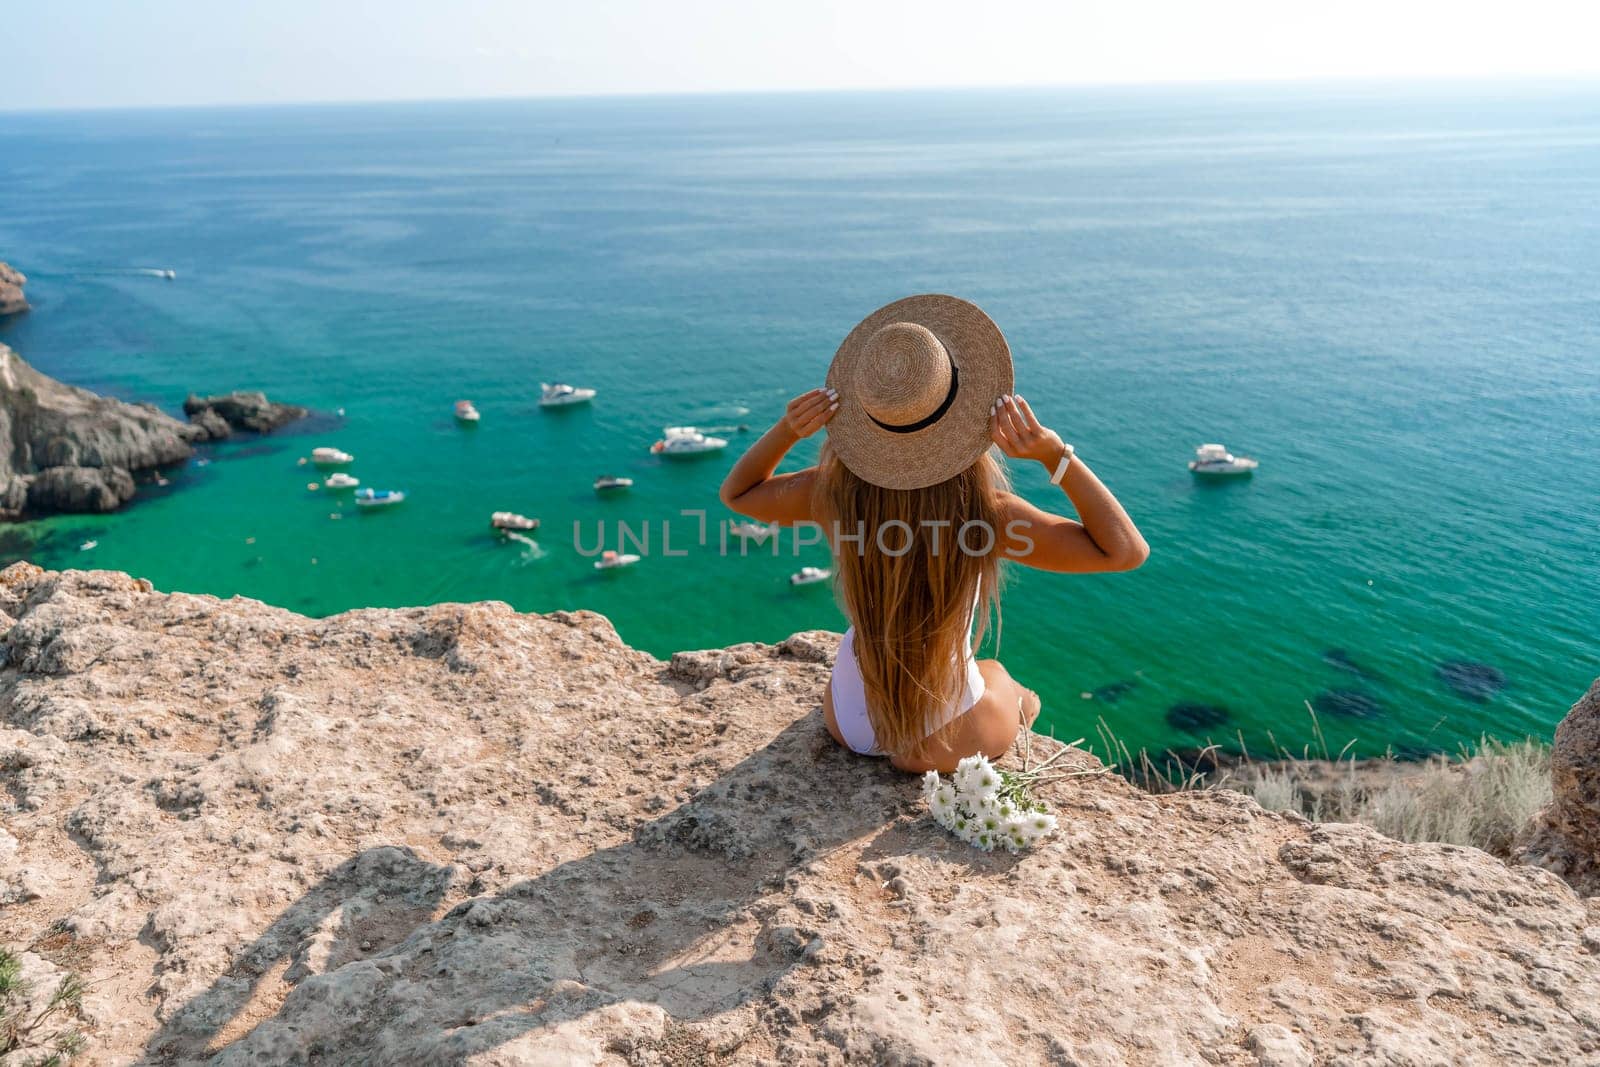 Beach holidays. A hot beautiful woman in a sun hat and a white bikini, sitting with her hands raised to her head, enjoying the view of the ocean on a hot summer day